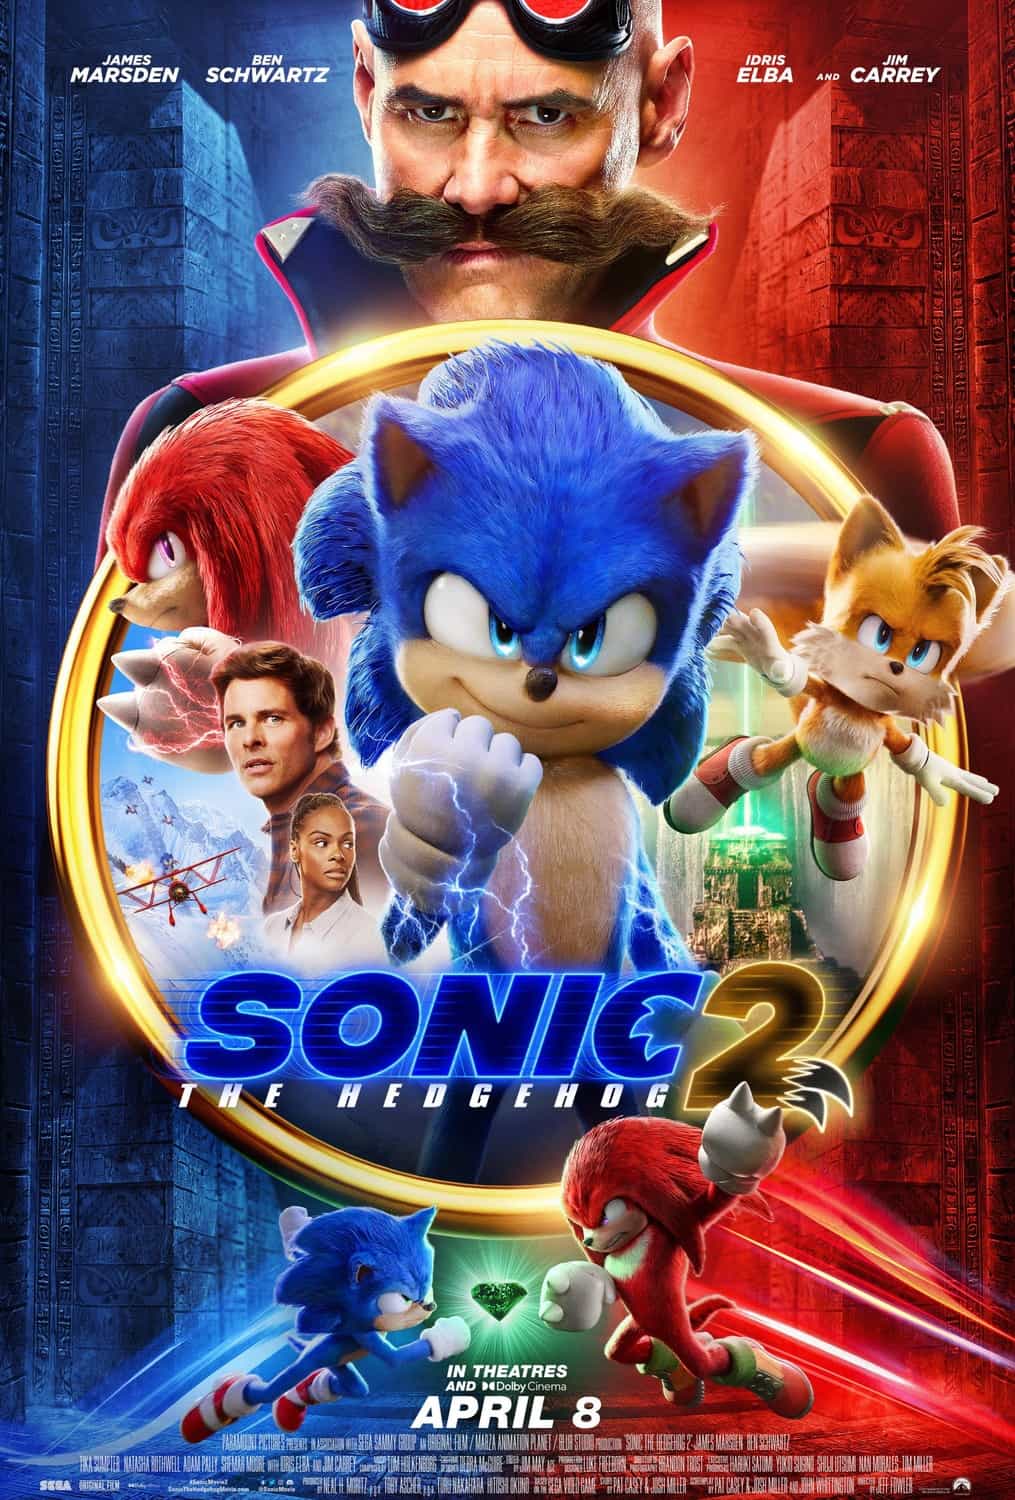 UK Box Office Weekend Report 22nd - 24th April 2022:  Sonic 2 goes back to the top of the UK box office on its 4th weekend of release while Massive Tallent is new at 7